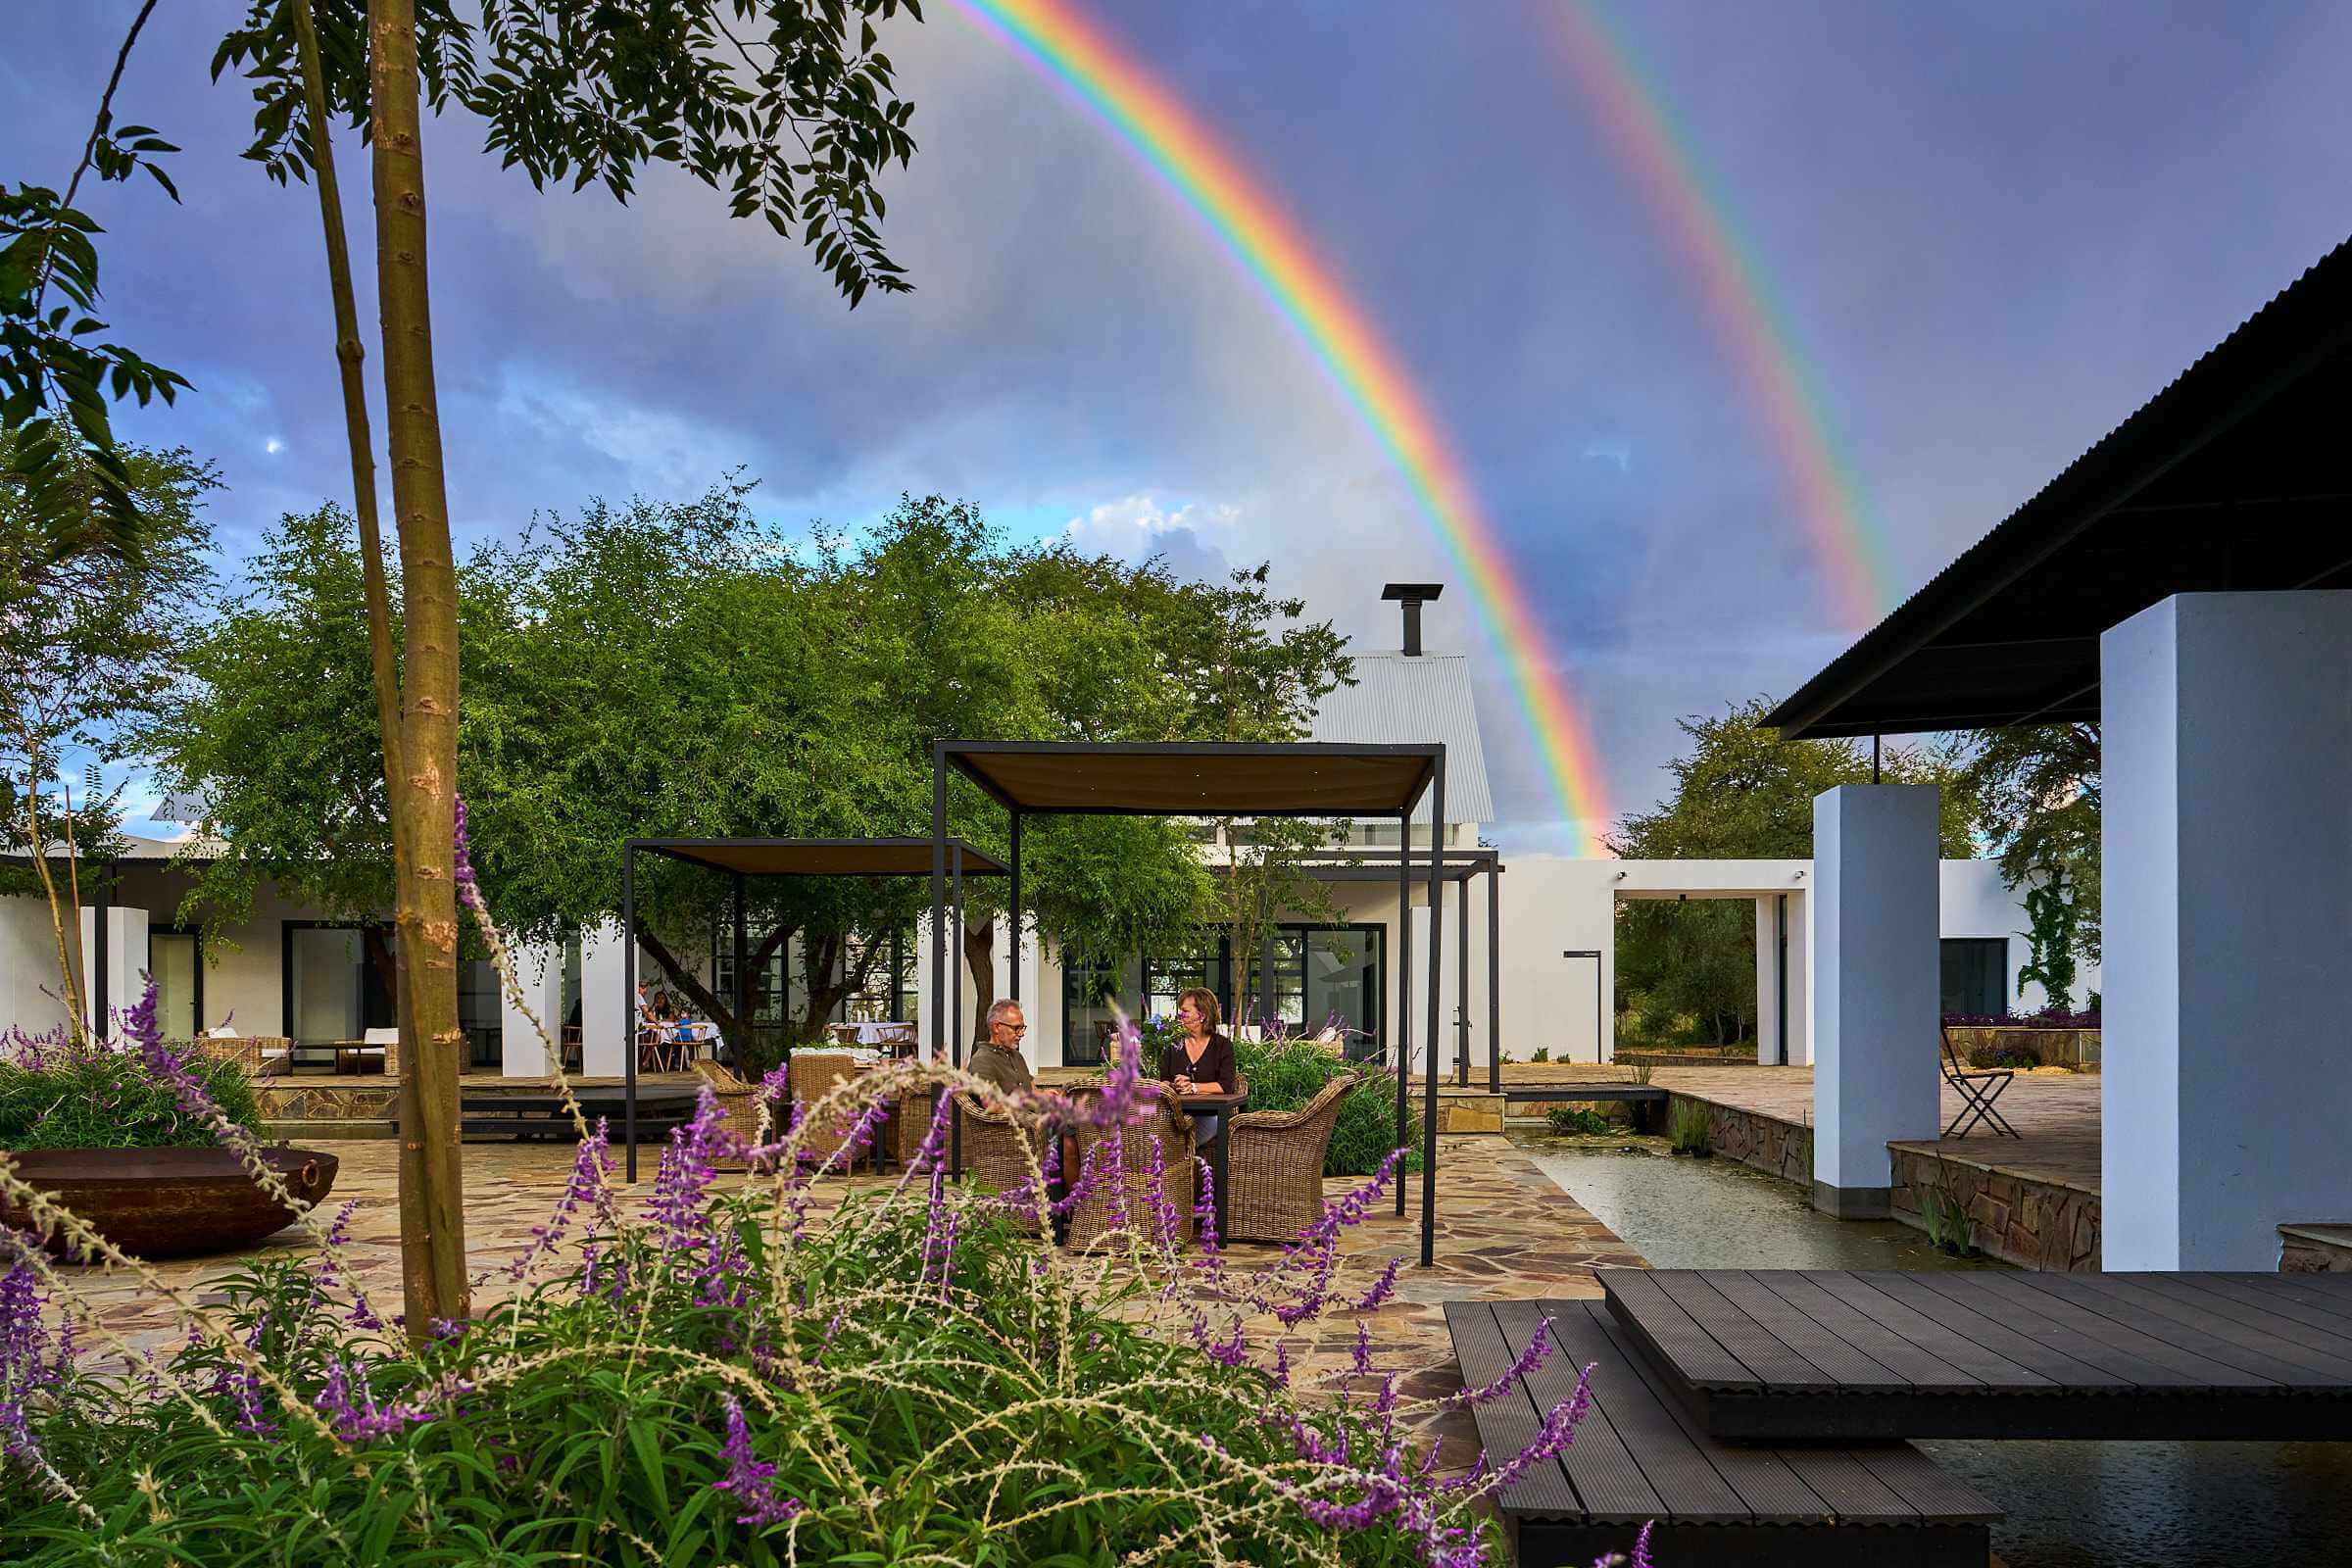 A couple enjoying a glass of wine in the tranquillity of the outside of the Sandwerf restaurant with a rainbow spanning the skies above.